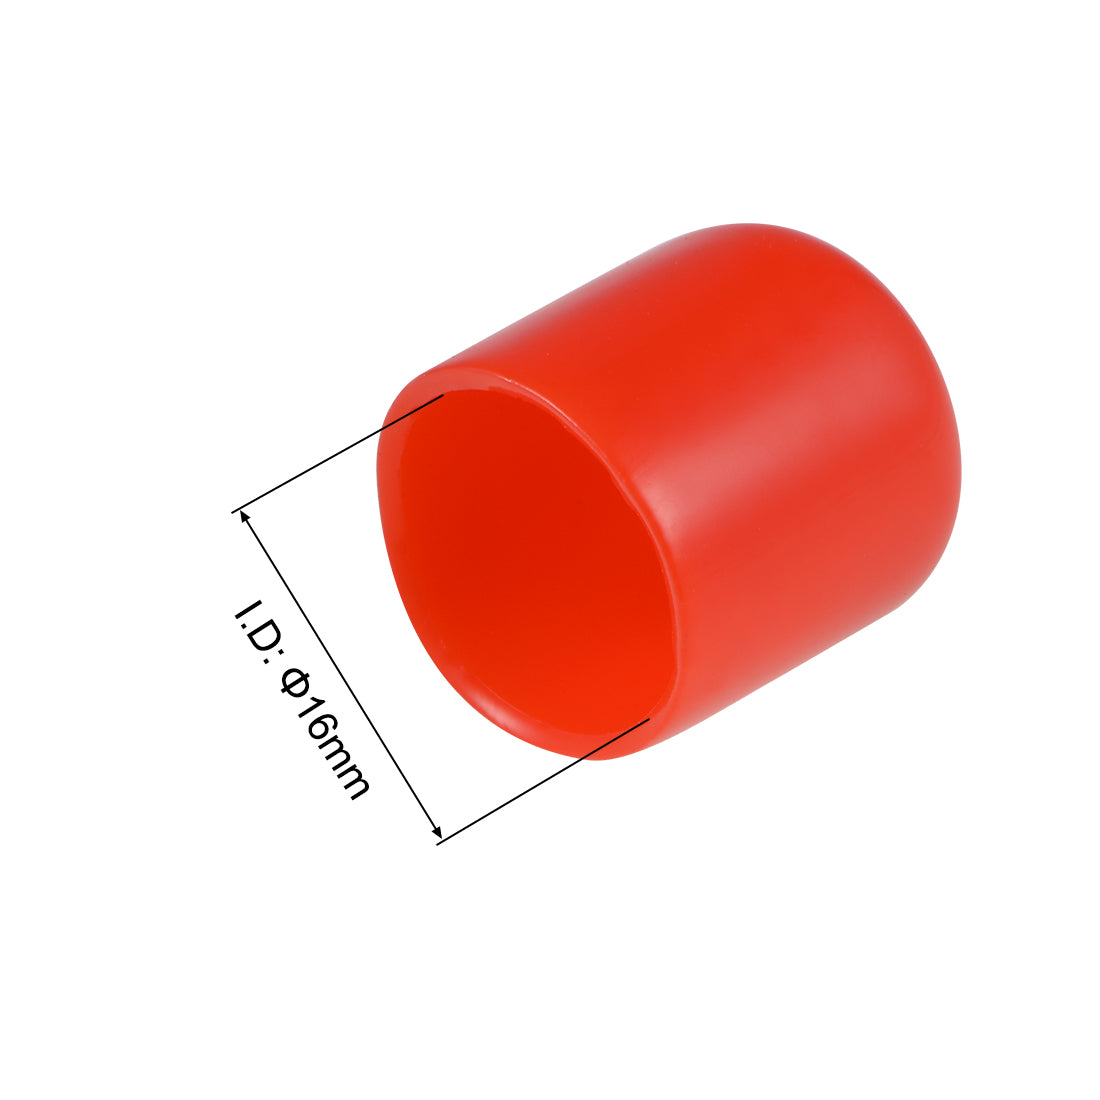 uxcell Uxcell 25pcs Rubber End Caps 16mm ID 20mm Height Screw Thread Protectors Red